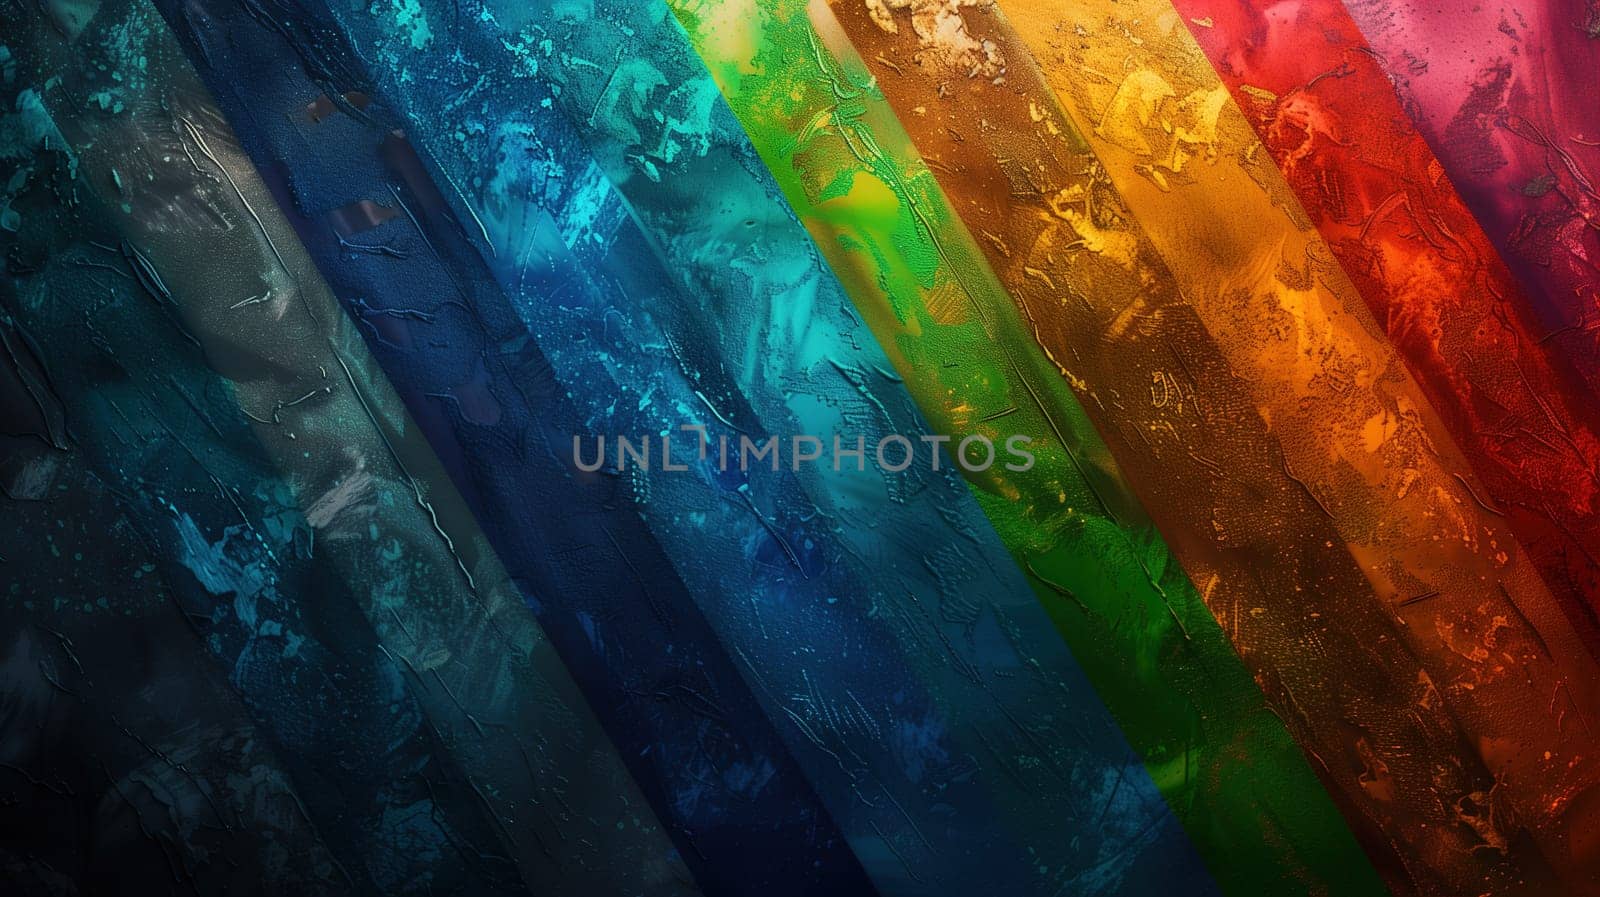 A detailed view of a curtain displaying all the colors of the rainbow, symbolizing the lgbt pride concept. The curtain is vibrant and eye-catching, showcasing a spectrum of colors in a close-up shot.